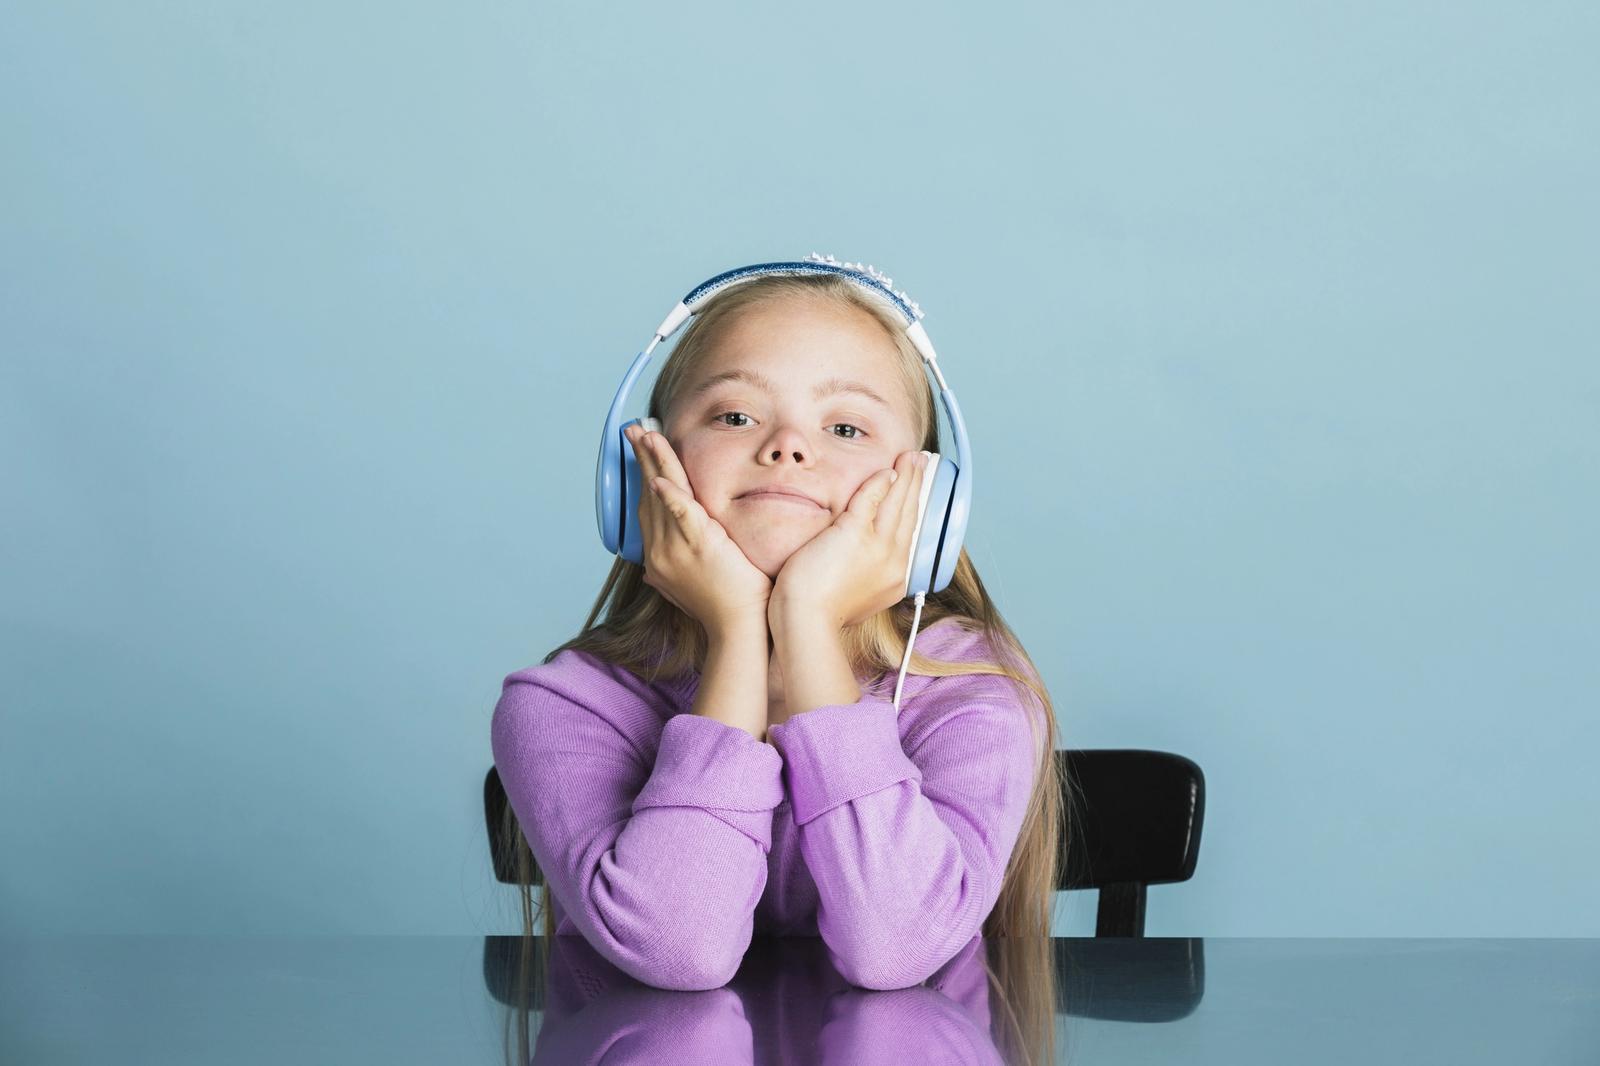 A young girl with Down syndrome wearing headphones and sitting at a table